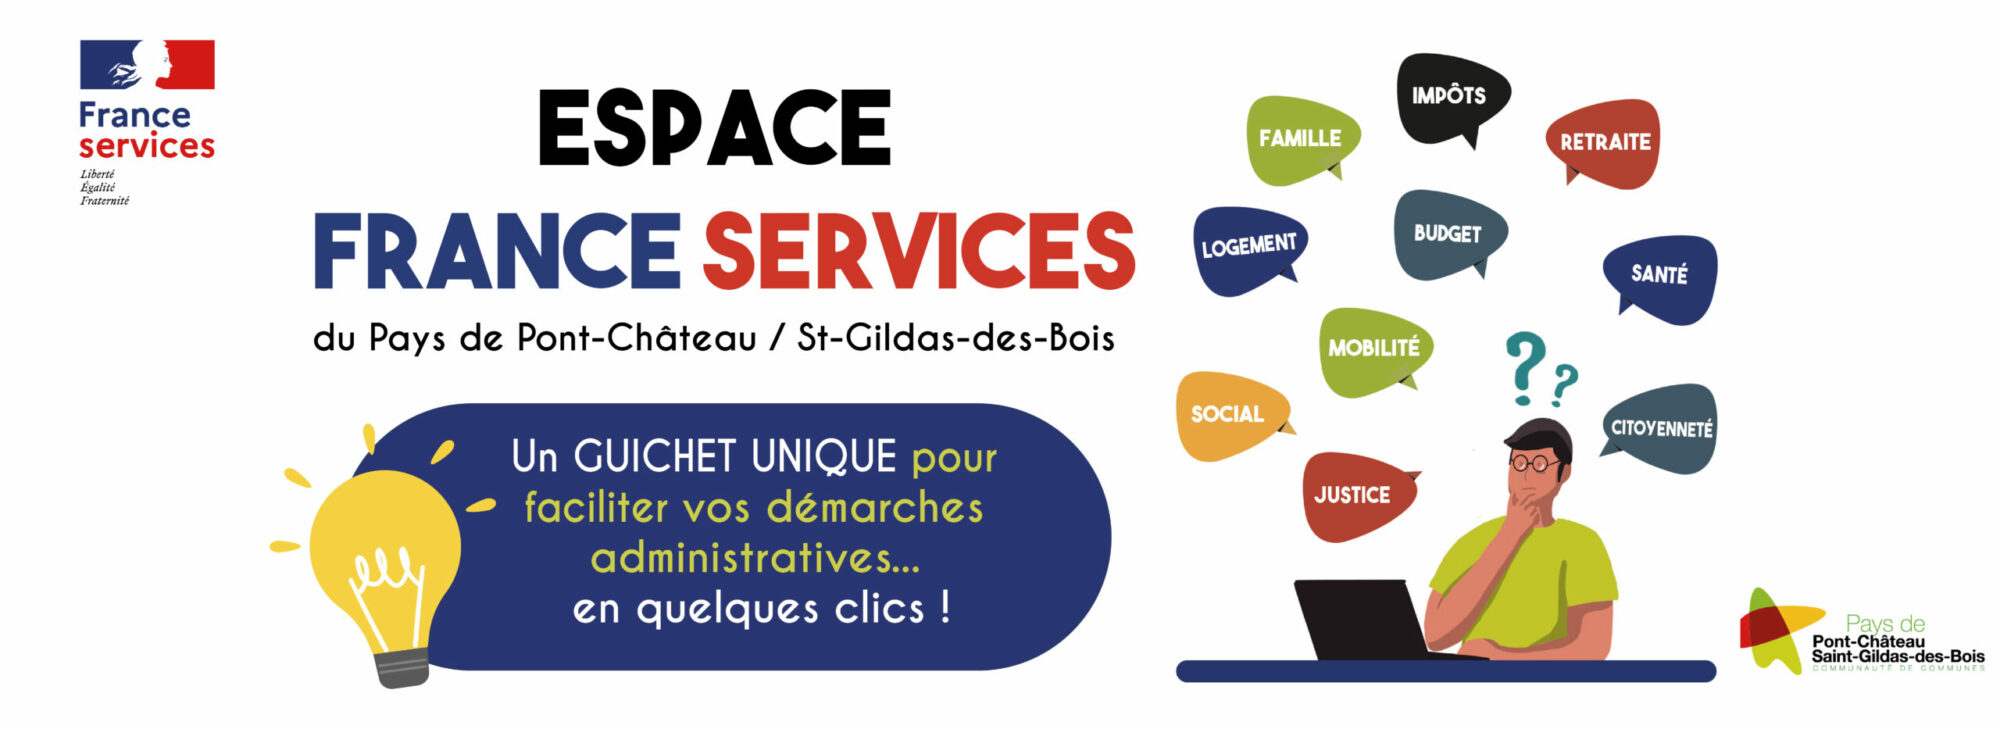 Banniere-Espace-France-Services-scaled